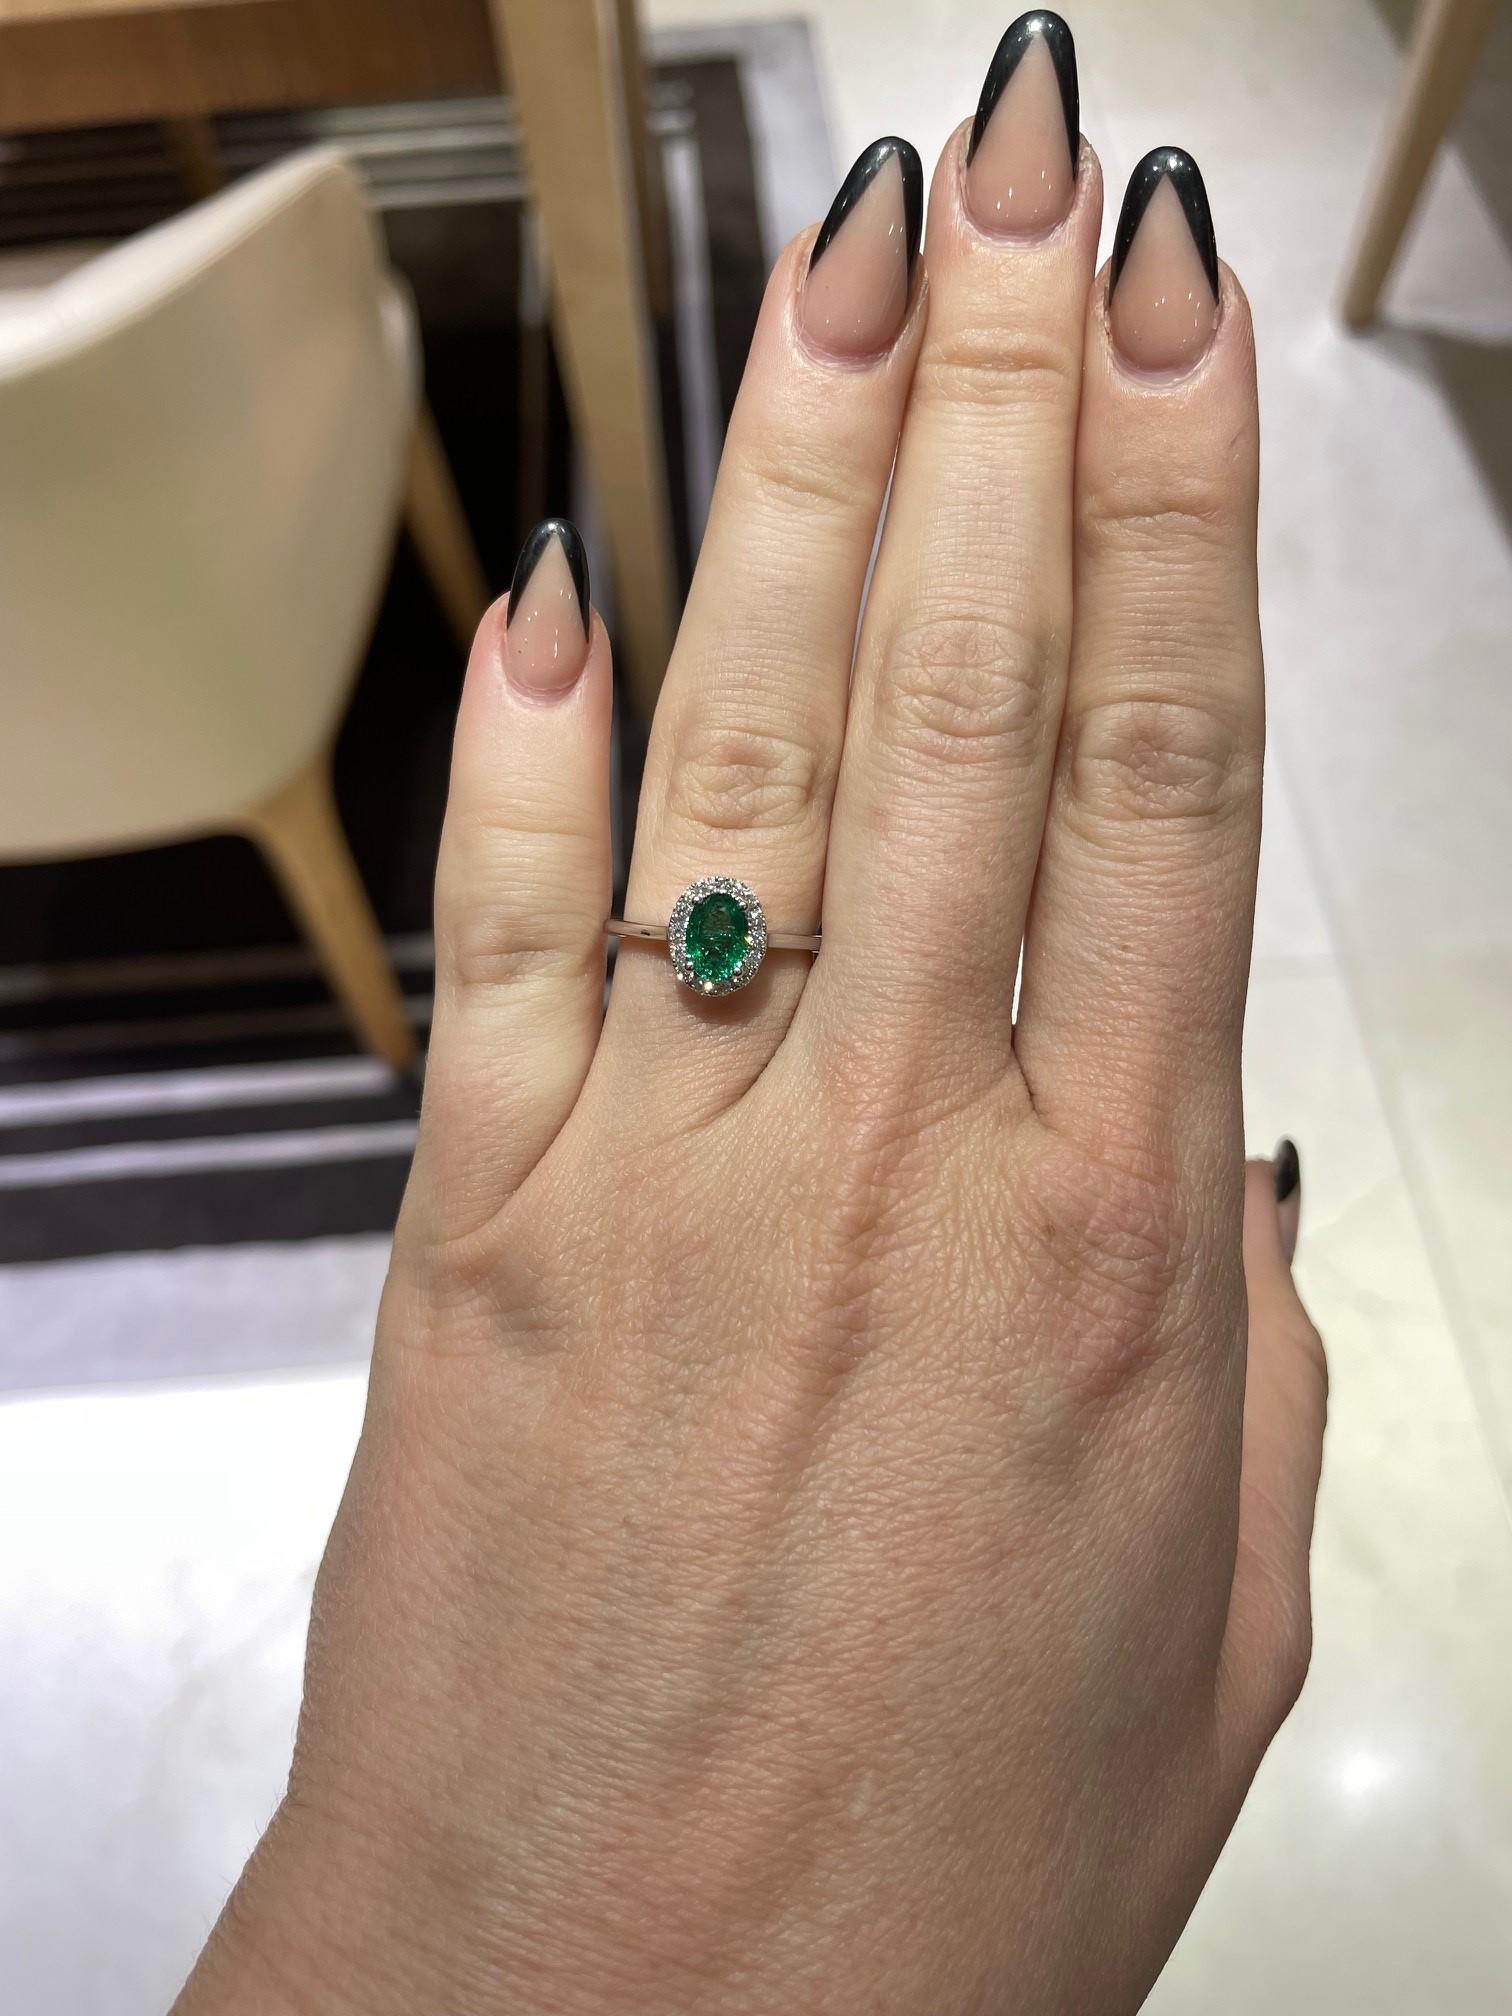 This elegant ring is crafted of 18 karat white gold with a center oval Zambia green emerald totaling 0.65 carats and is surrounded by 14 round brilliant cut diamonds totaling 0.17 carat total weight with G-H color and VS2-SI1 clarity.